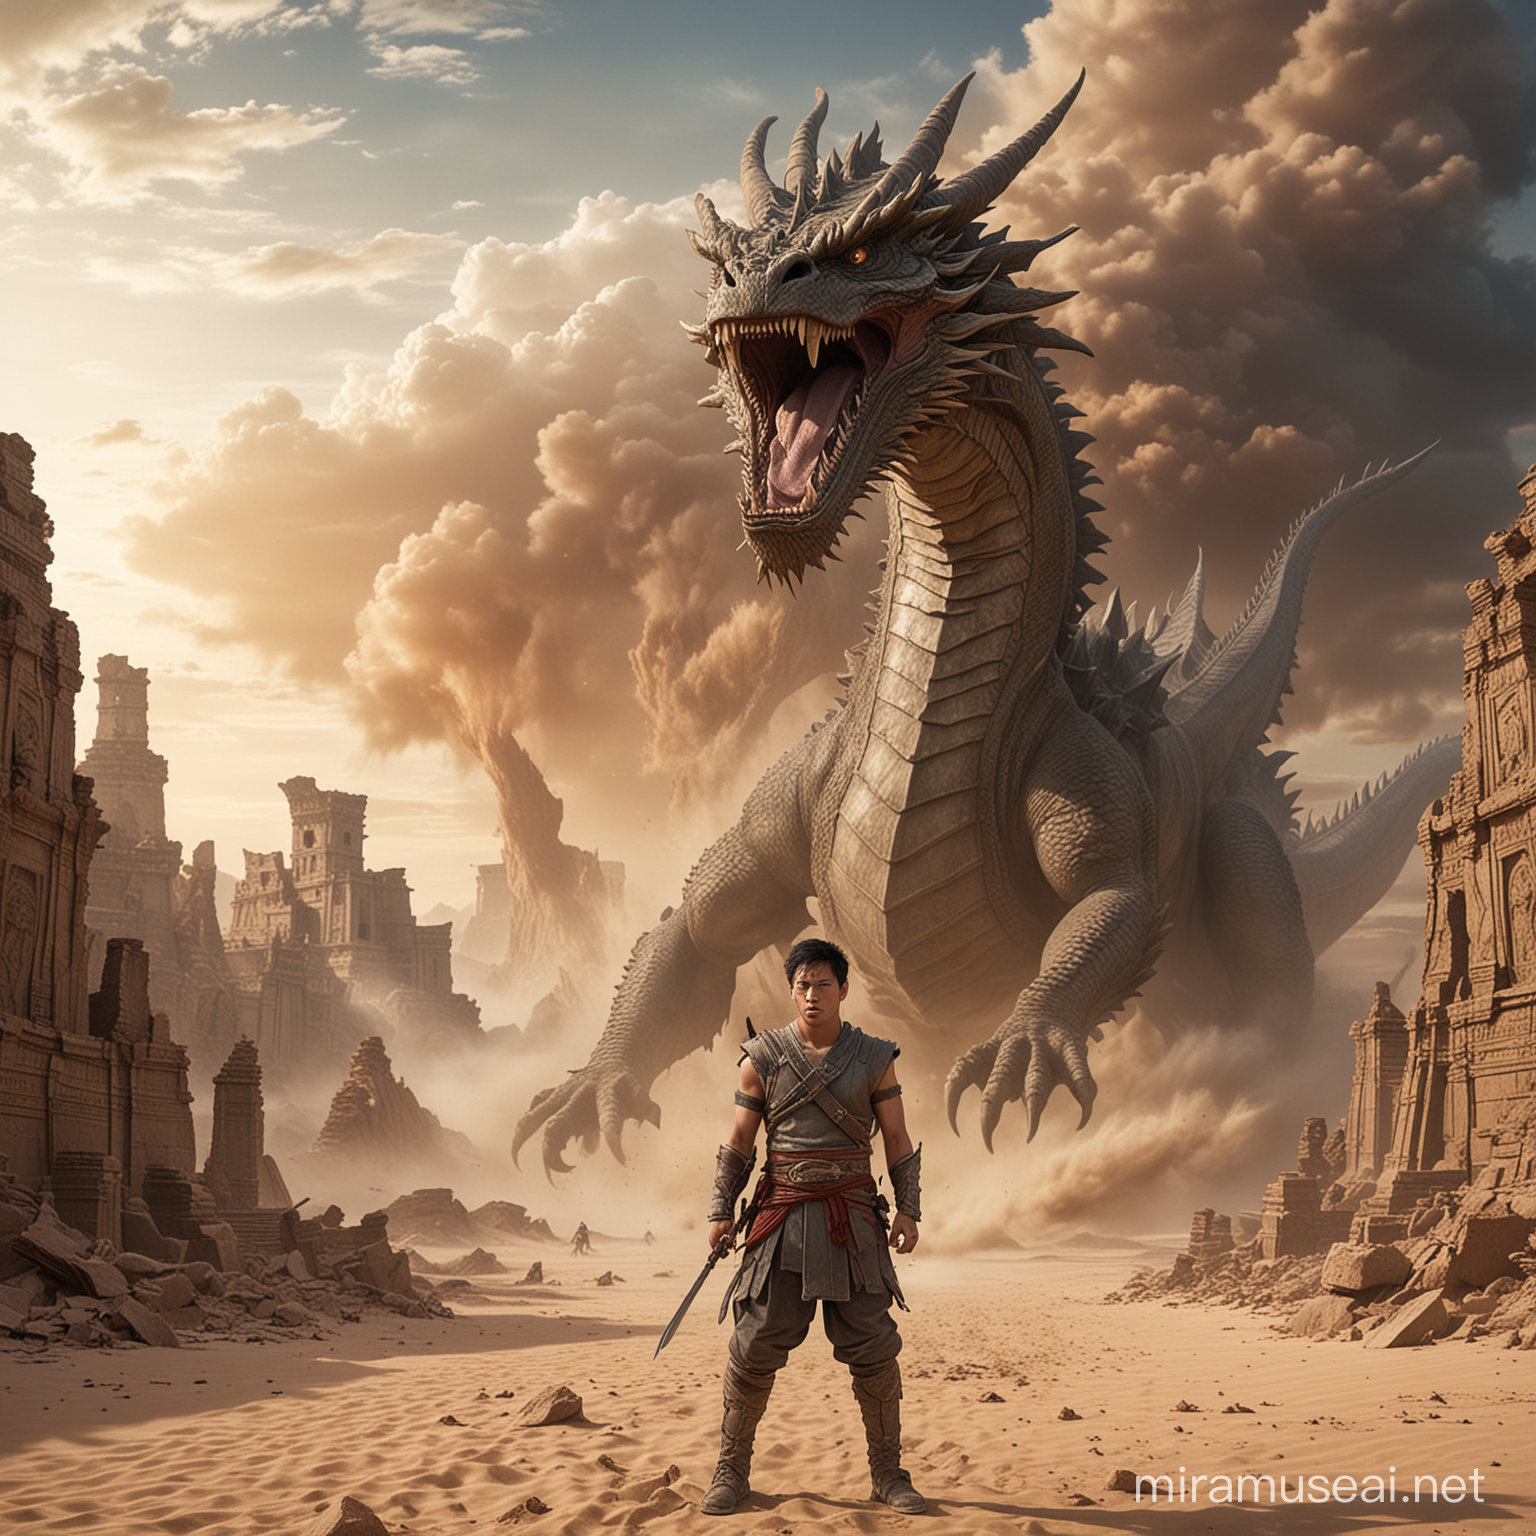 portrait of a young Asian man in battle attire, with an angry expression, with a giant dragon emerging from a cloud of dust or sand. The background is a vast desert, surrounded by the ruins of tall ancient structures. The sky is cloudy, This dragon has detailed scales and terrifying features. Its body is only partially visible because it is still hidden behind a cloud of dust. Focus on the face